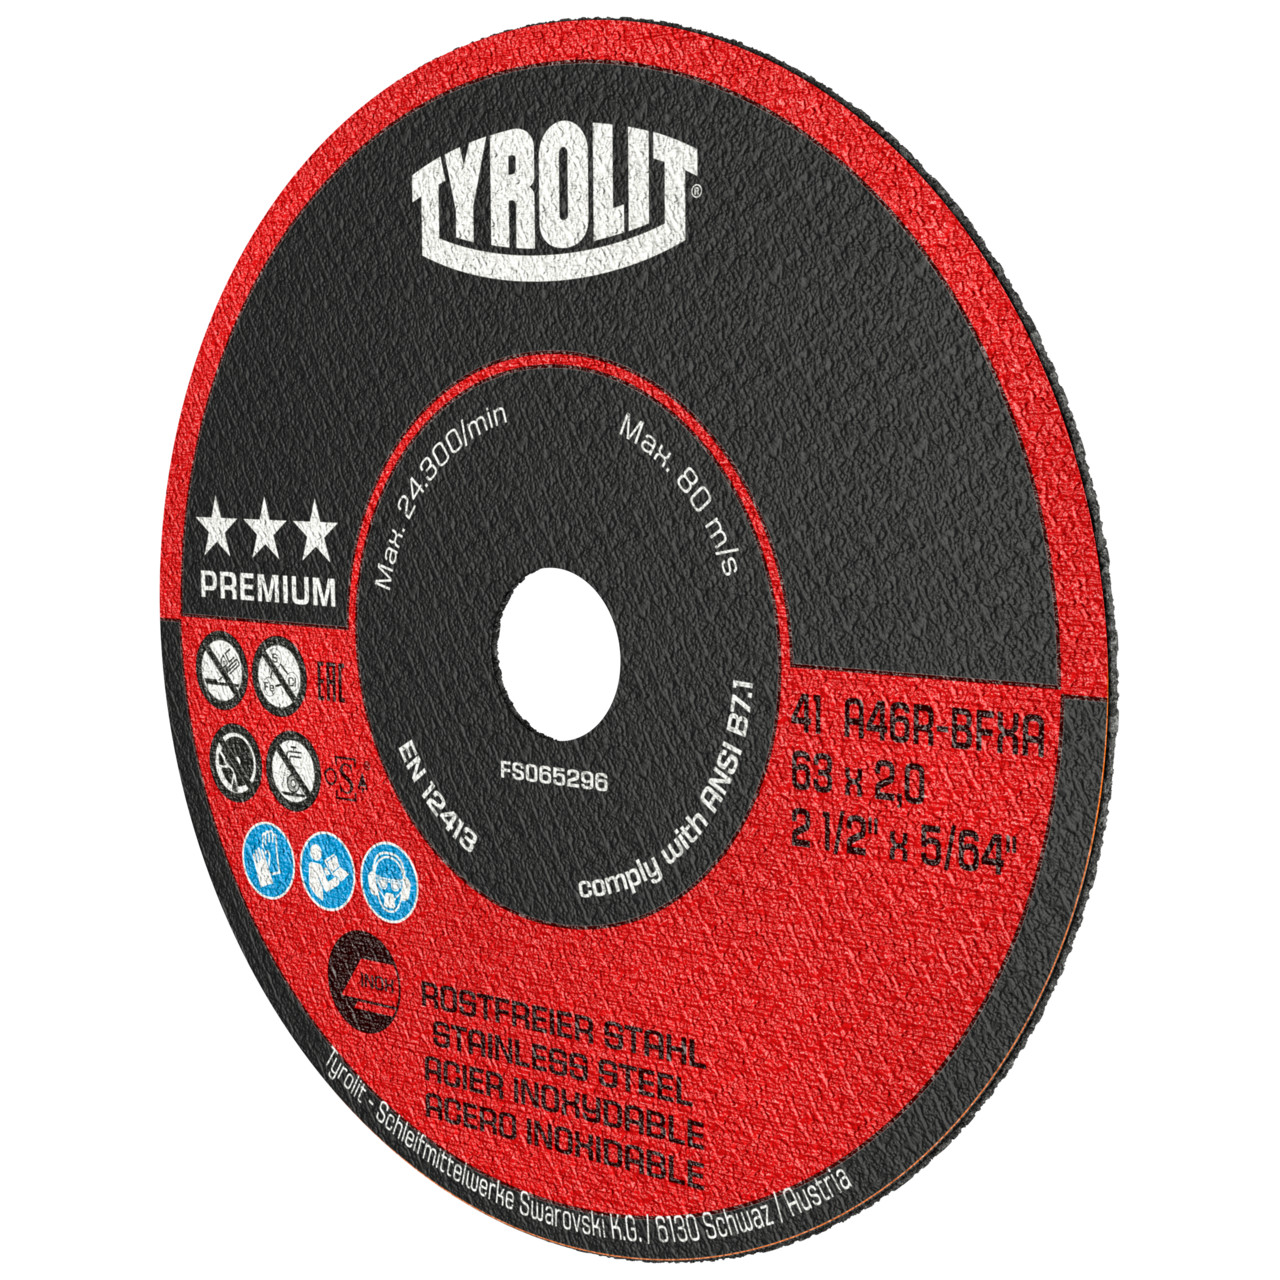 Tyrolit Cutting discs DxDxH 63x1x10 For stainless steel, shape: 41 - straight version, Art. 299269